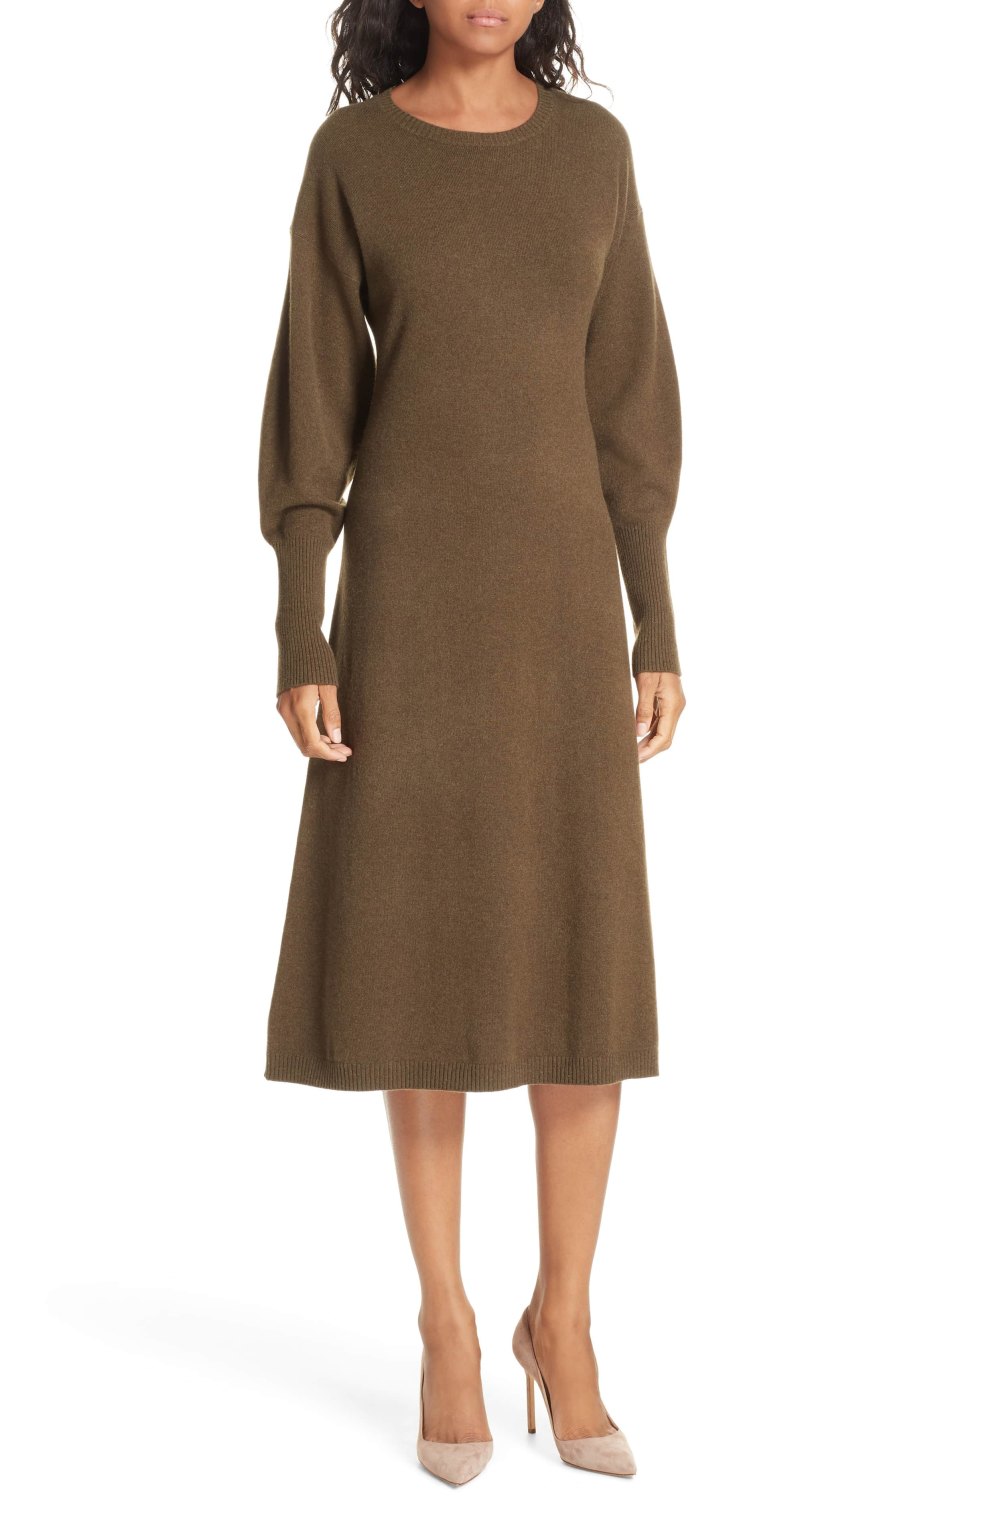 cashmere dress nordstrom collection